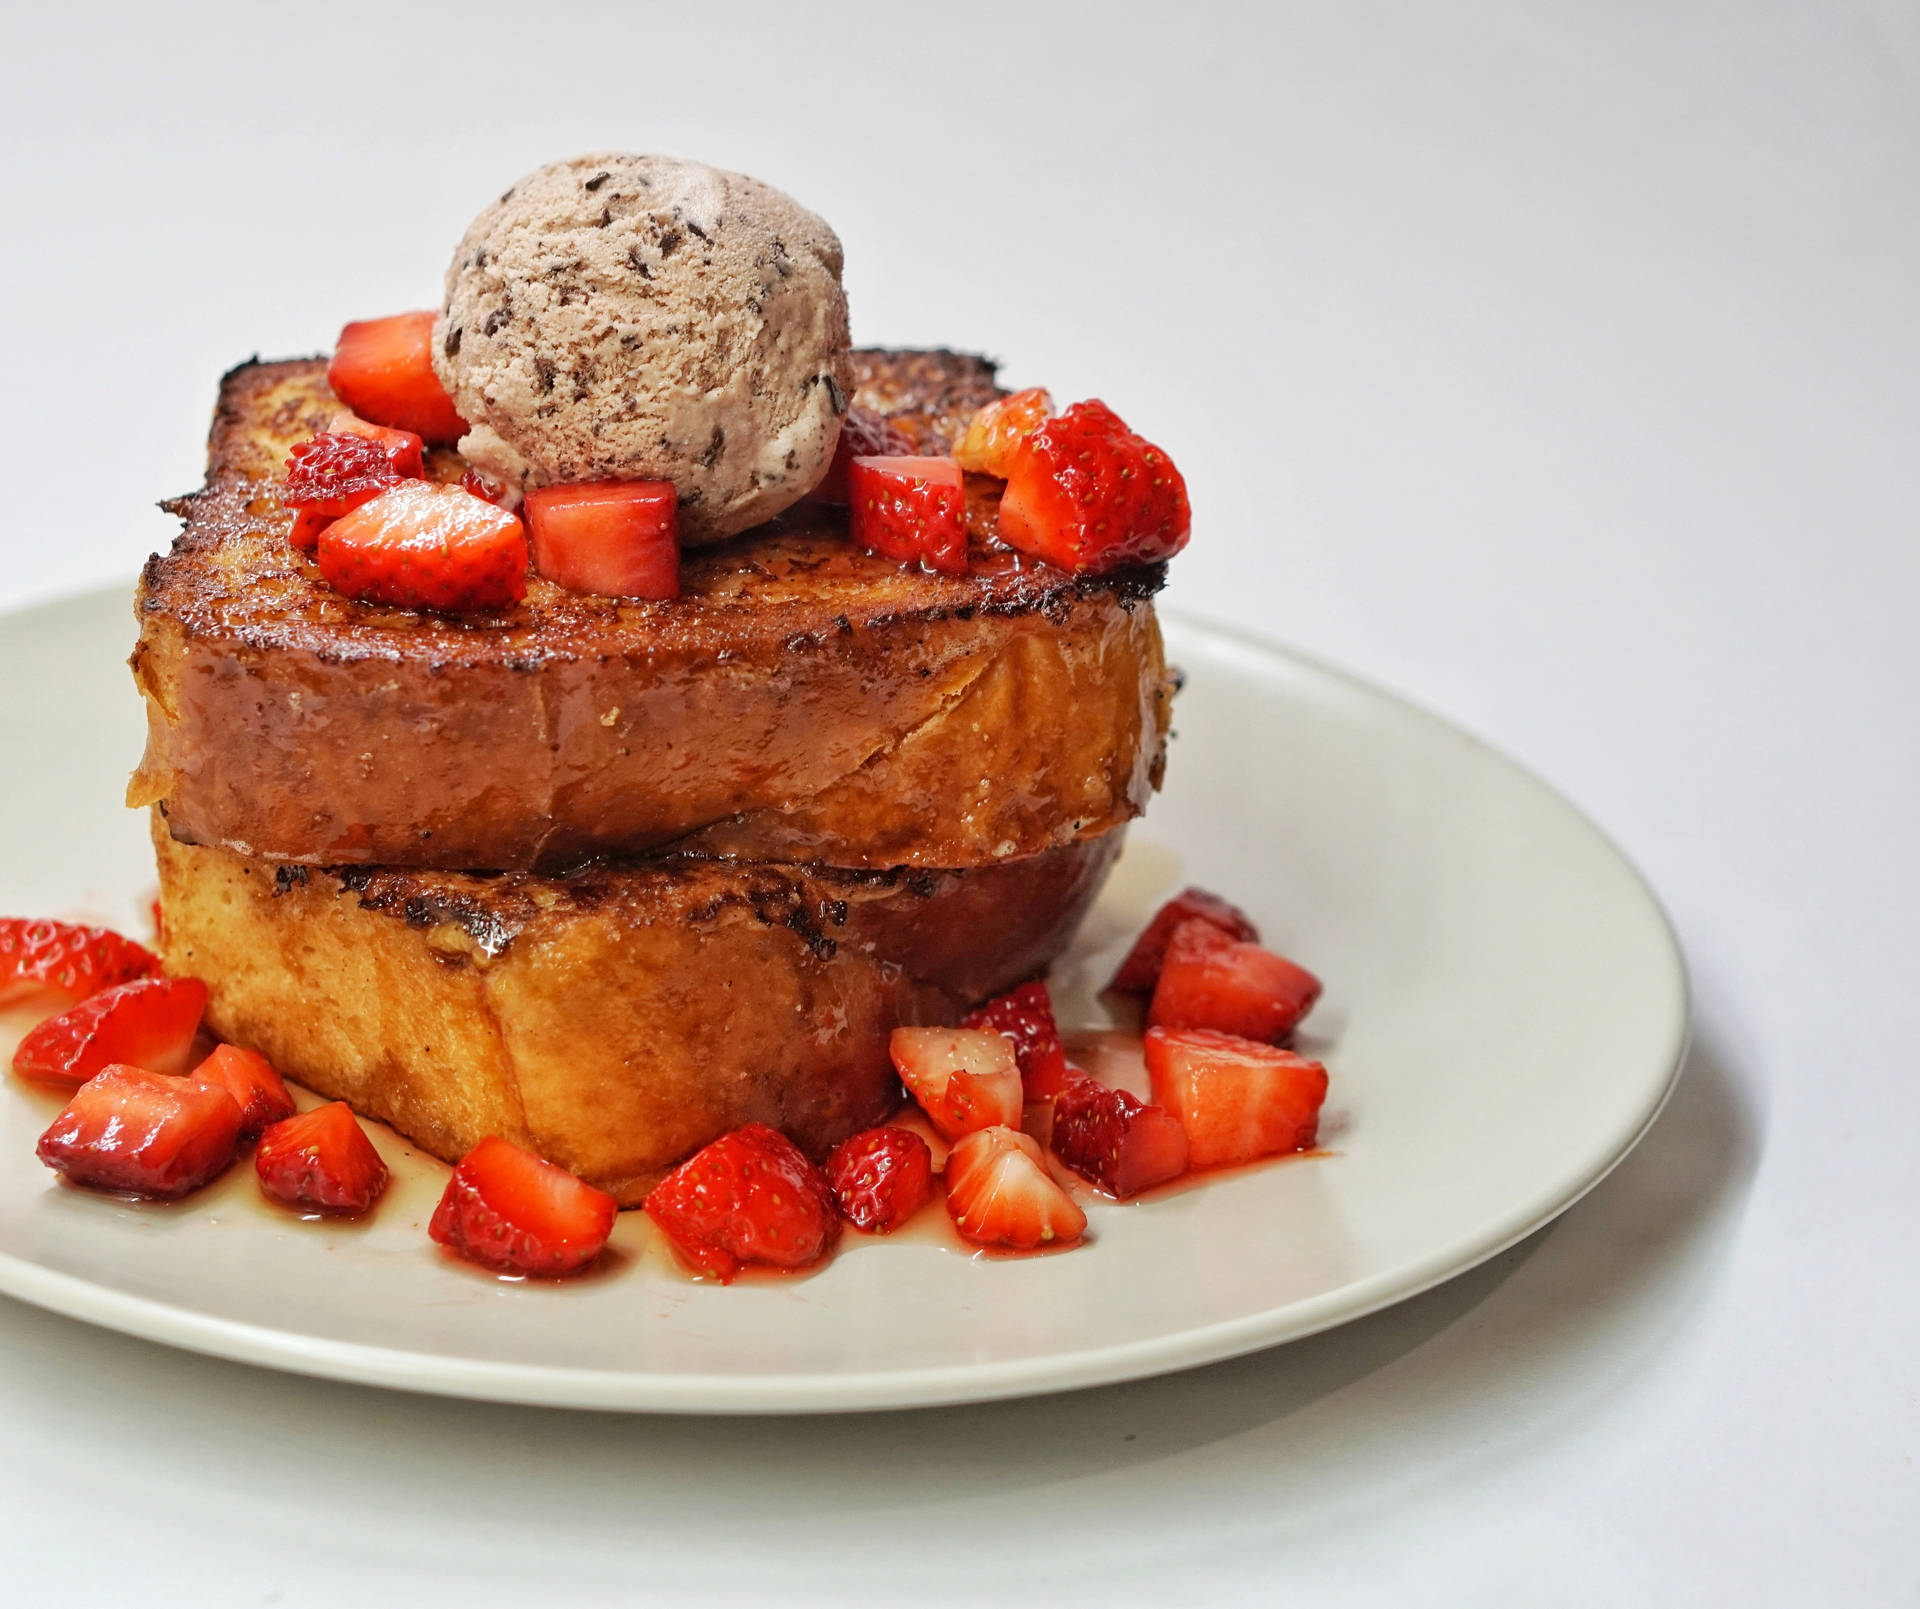 Gourmet Homemade French Toast With Berries And Powdered Sugar Background